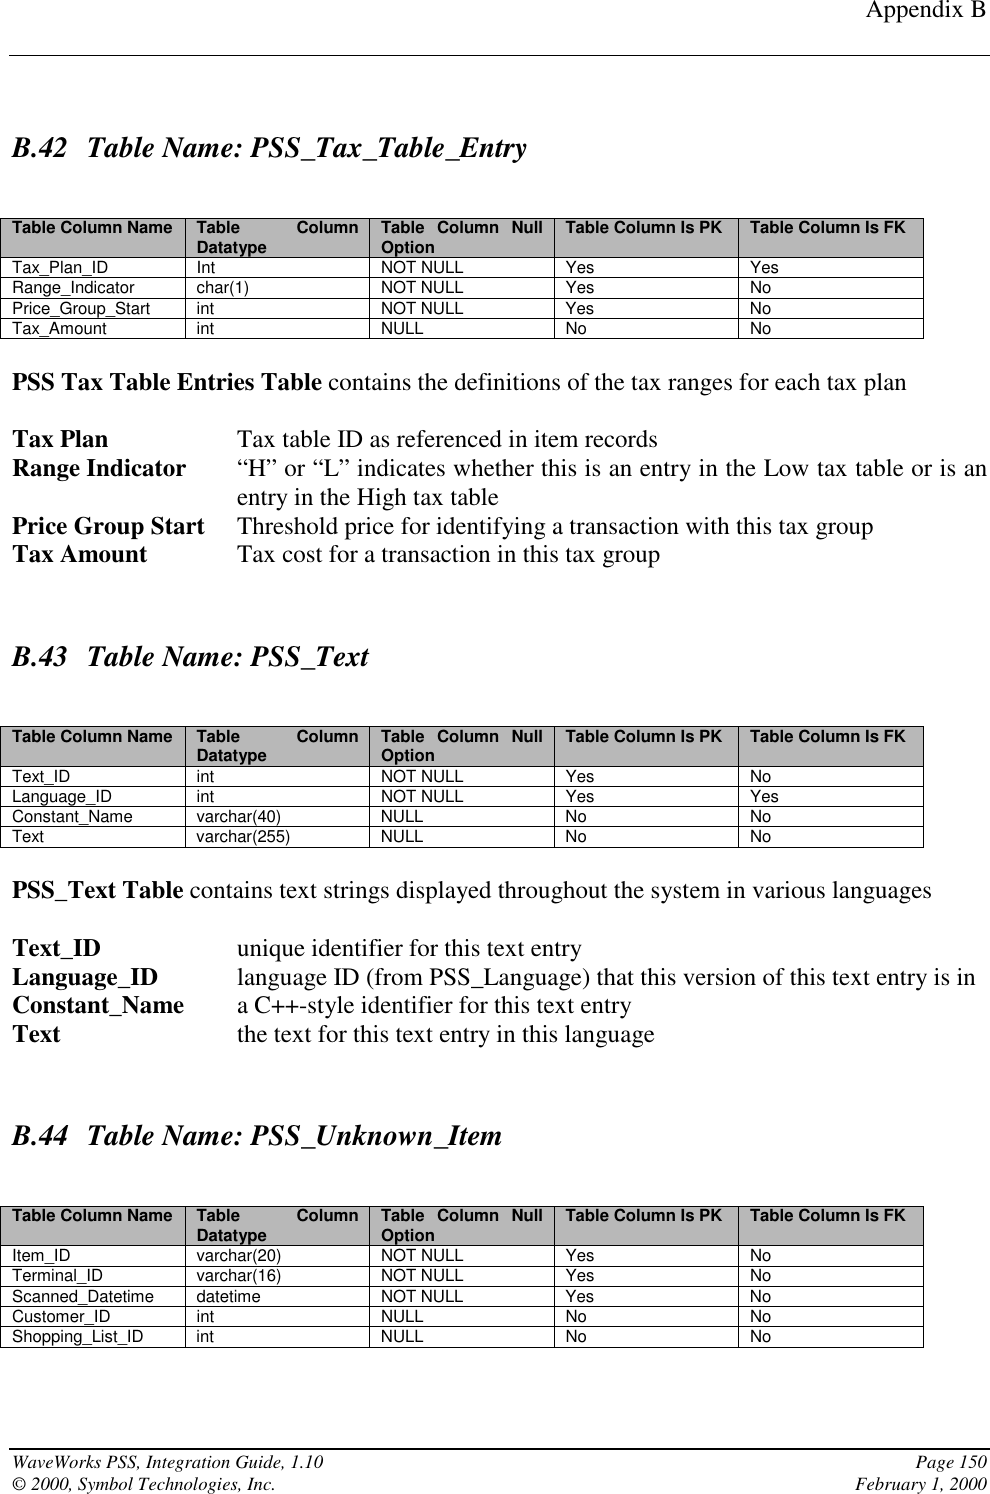 Appendix BWaveWorks PSS, Integration Guide, 1.10 Page 150© 2000, Symbol Technologies, Inc. February 1, 2000B.42 Table Name: PSS_Tax_Table_EntryTable Column Name Table ColumnDatatype Table Column NullOption Table Column Is PK Table Column Is FKTax_Plan_ID Int NOT NULL Yes YesRange_Indicator char(1) NOT NULL Yes NoPrice_Group_Start int NOT NULL Yes NoTax_Amount int NULL No NoPSS Tax Table Entries Table contains the definitions of the tax ranges for each tax planTax Plan Tax table ID as referenced in item recordsRange Indicator “H” or “L” indicates whether this is an entry in the Low tax table or is anentry in the High tax tablePrice Group Start Threshold price for identifying a transaction with this tax groupTax Amount Tax cost for a transaction in this tax groupB.43 Table Name: PSS_TextTable Column Name Table ColumnDatatype Table Column NullOption Table Column Is PK Table Column Is FKText_ID int NOT NULL Yes NoLanguage_ID int NOT NULL Yes YesConstant_Name varchar(40) NULL No NoText varchar(255) NULL No NoPSS_Text Table contains text strings displayed throughout the system in various languagesText_ID unique identifier for this text entryLanguage_ID language ID (from PSS_Language) that this version of this text entry is inConstant_Name a C++-style identifier for this text entryText the text for this text entry in this languageB.44 Table Name: PSS_Unknown_ItemTable Column Name Table ColumnDatatype Table Column NullOption Table Column Is PK Table Column Is FKItem_ID varchar(20) NOT NULL Yes NoTerminal_ID varchar(16) NOT NULL Yes NoScanned_Datetime datetime NOT NULL Yes NoCustomer_ID int NULL No NoShopping_List_ID int NULL No No